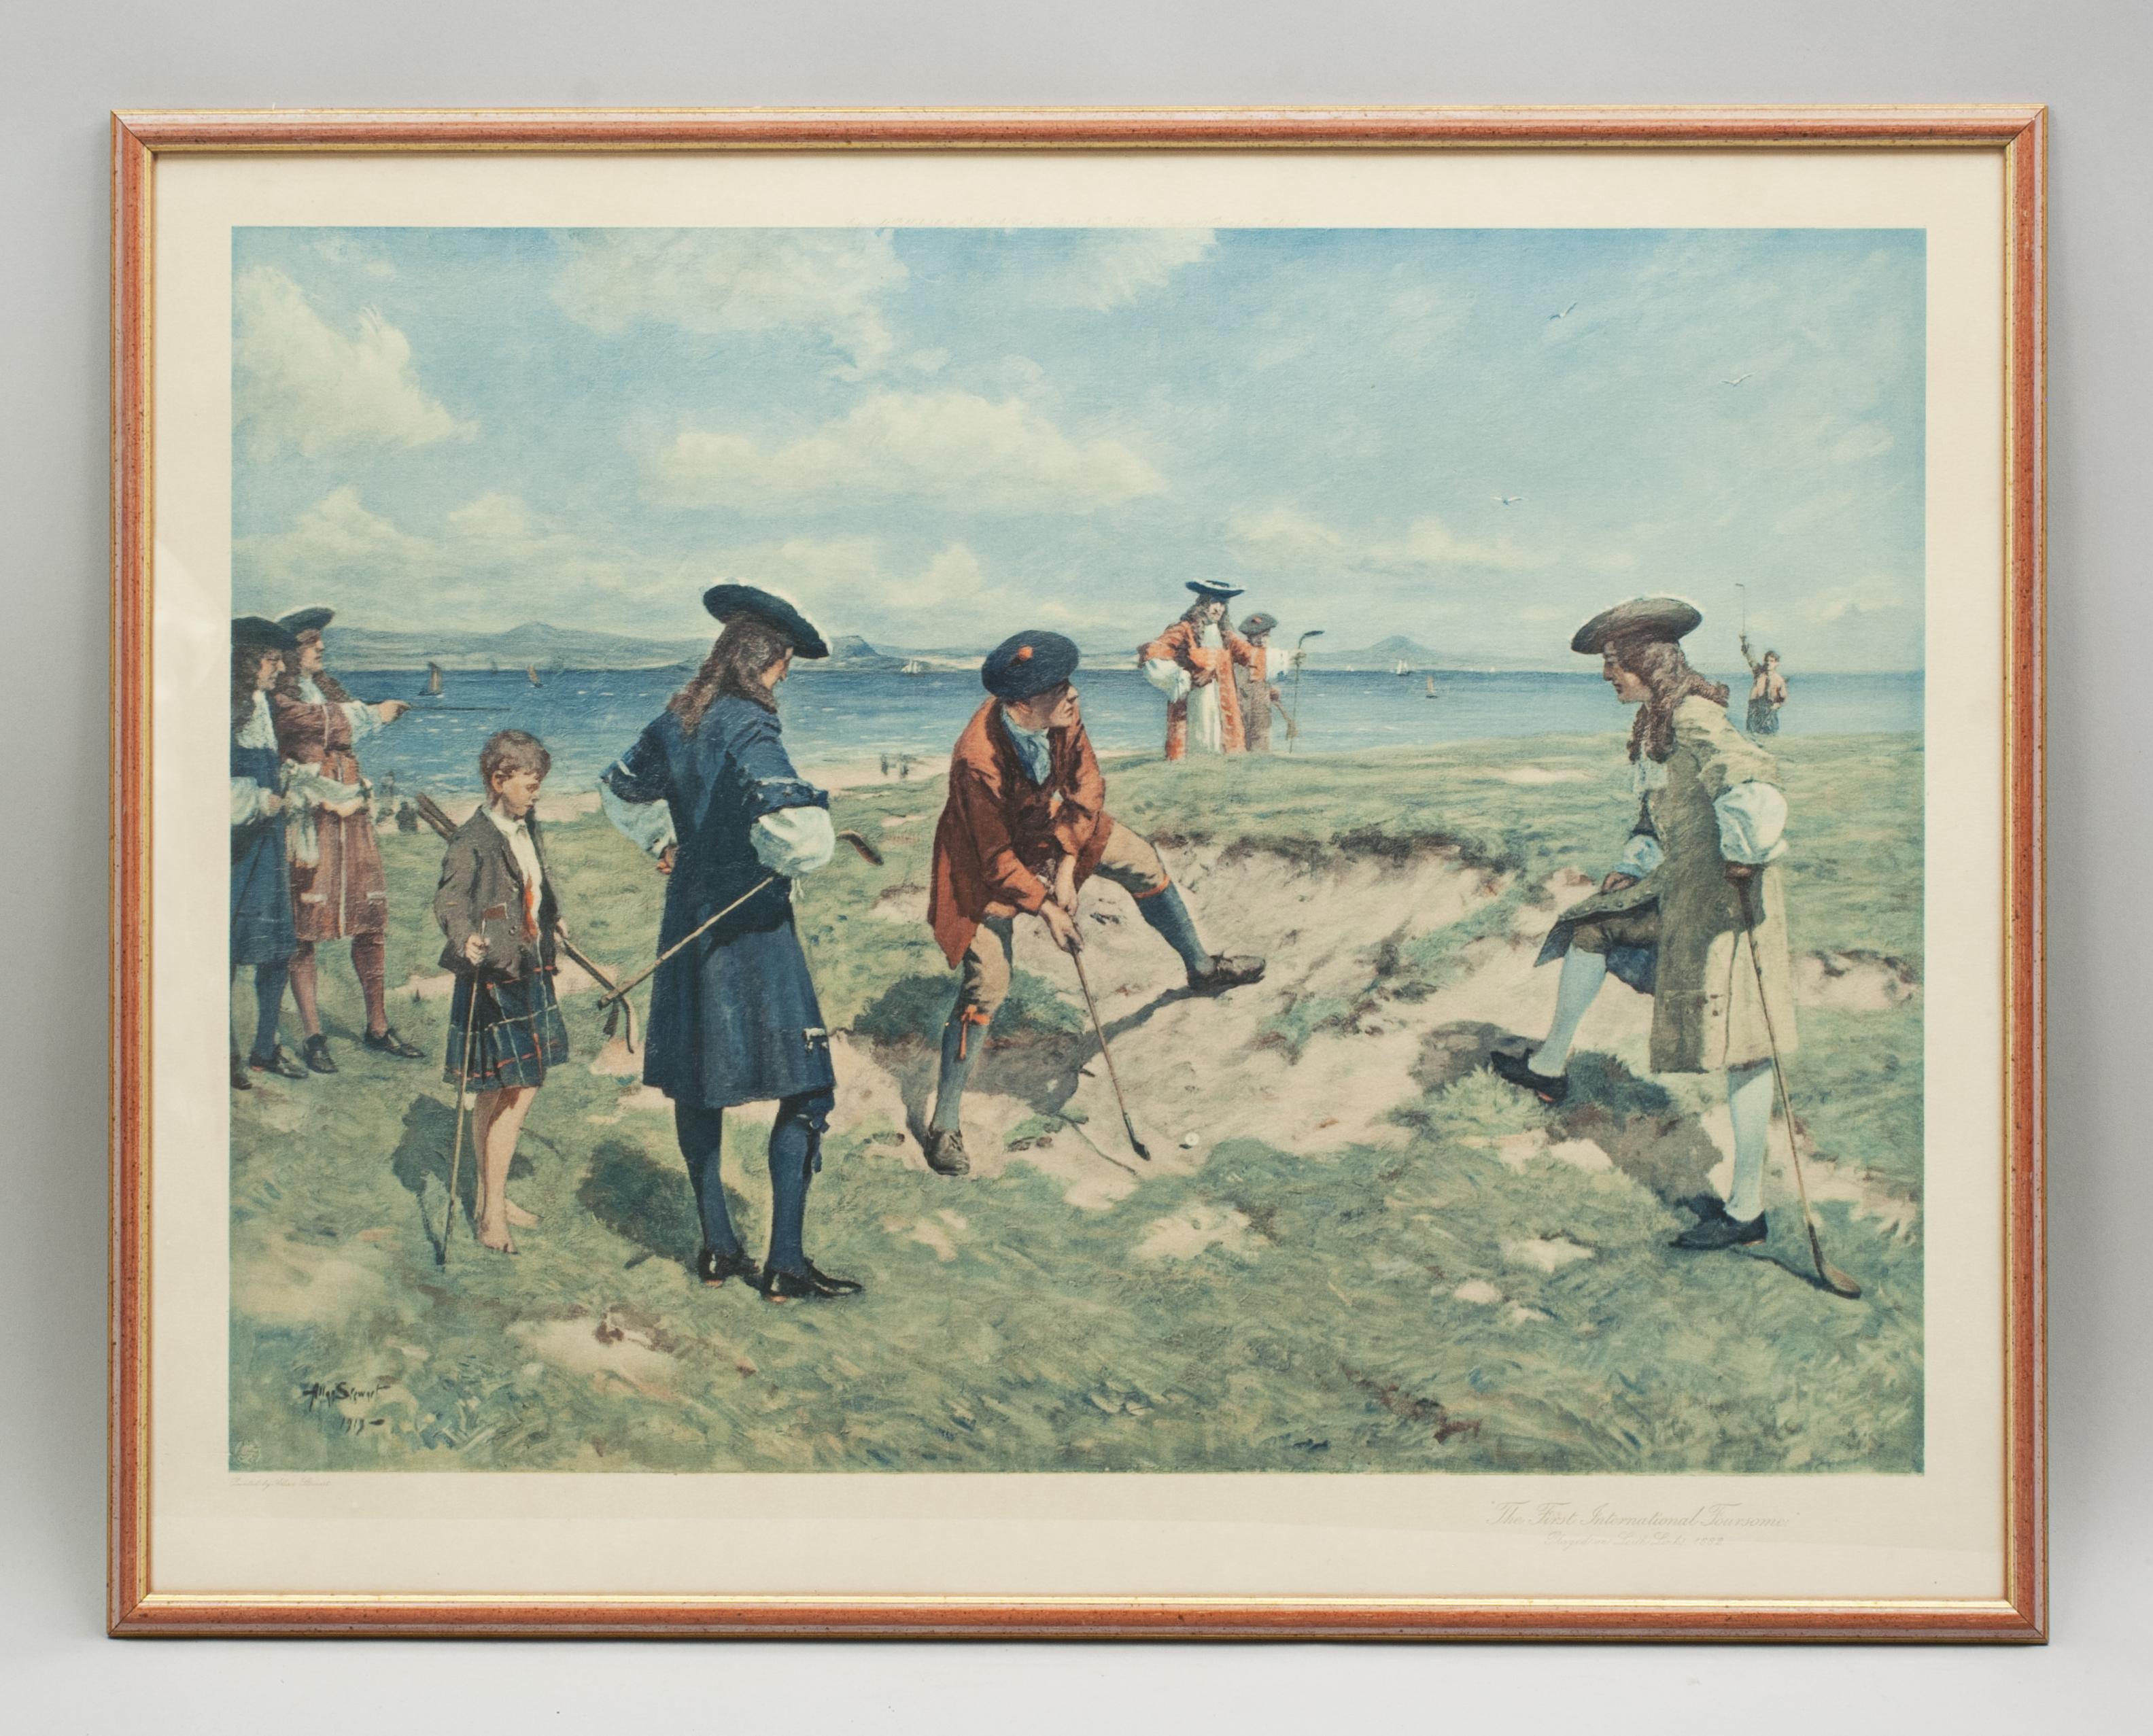 First International Foursome after Allen Stewart.
A rare original photolithograph print titled 'The First International Foursome, Played on Leith Links, 1682'. The print is taken from the original painting by the Scottish painter and illustrator,